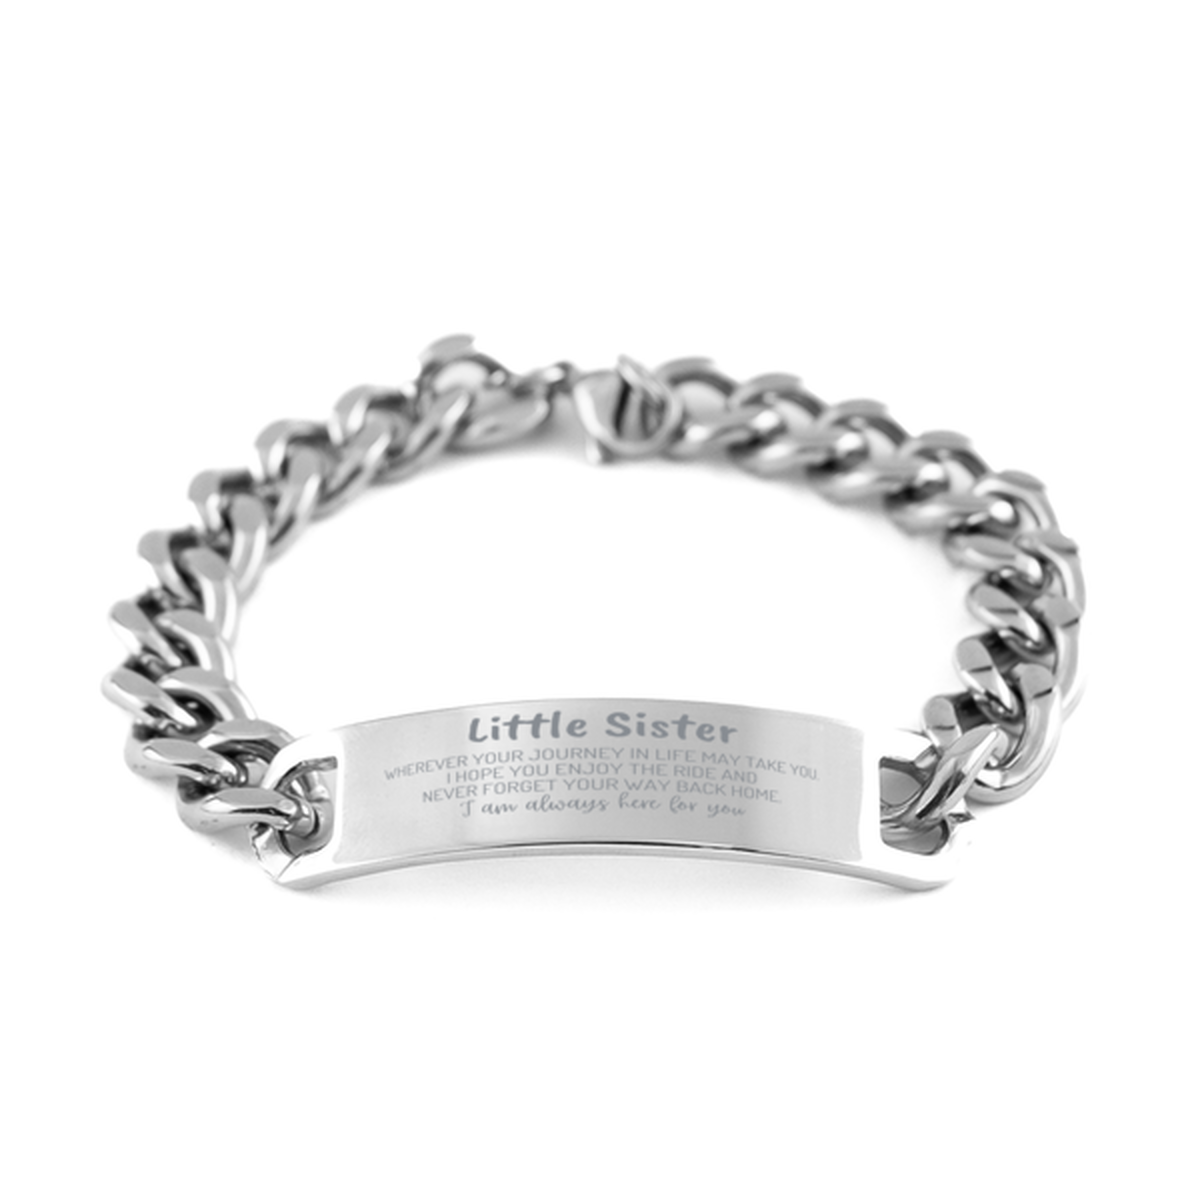 Little Sister wherever your journey in life may take you, I am always here for you Little Sister Cuban Chain Stainless Steel Bracelet, Awesome Christmas Gifts For Little Sister, Little Sister Birthday Gifts for Men Women Family Loved One